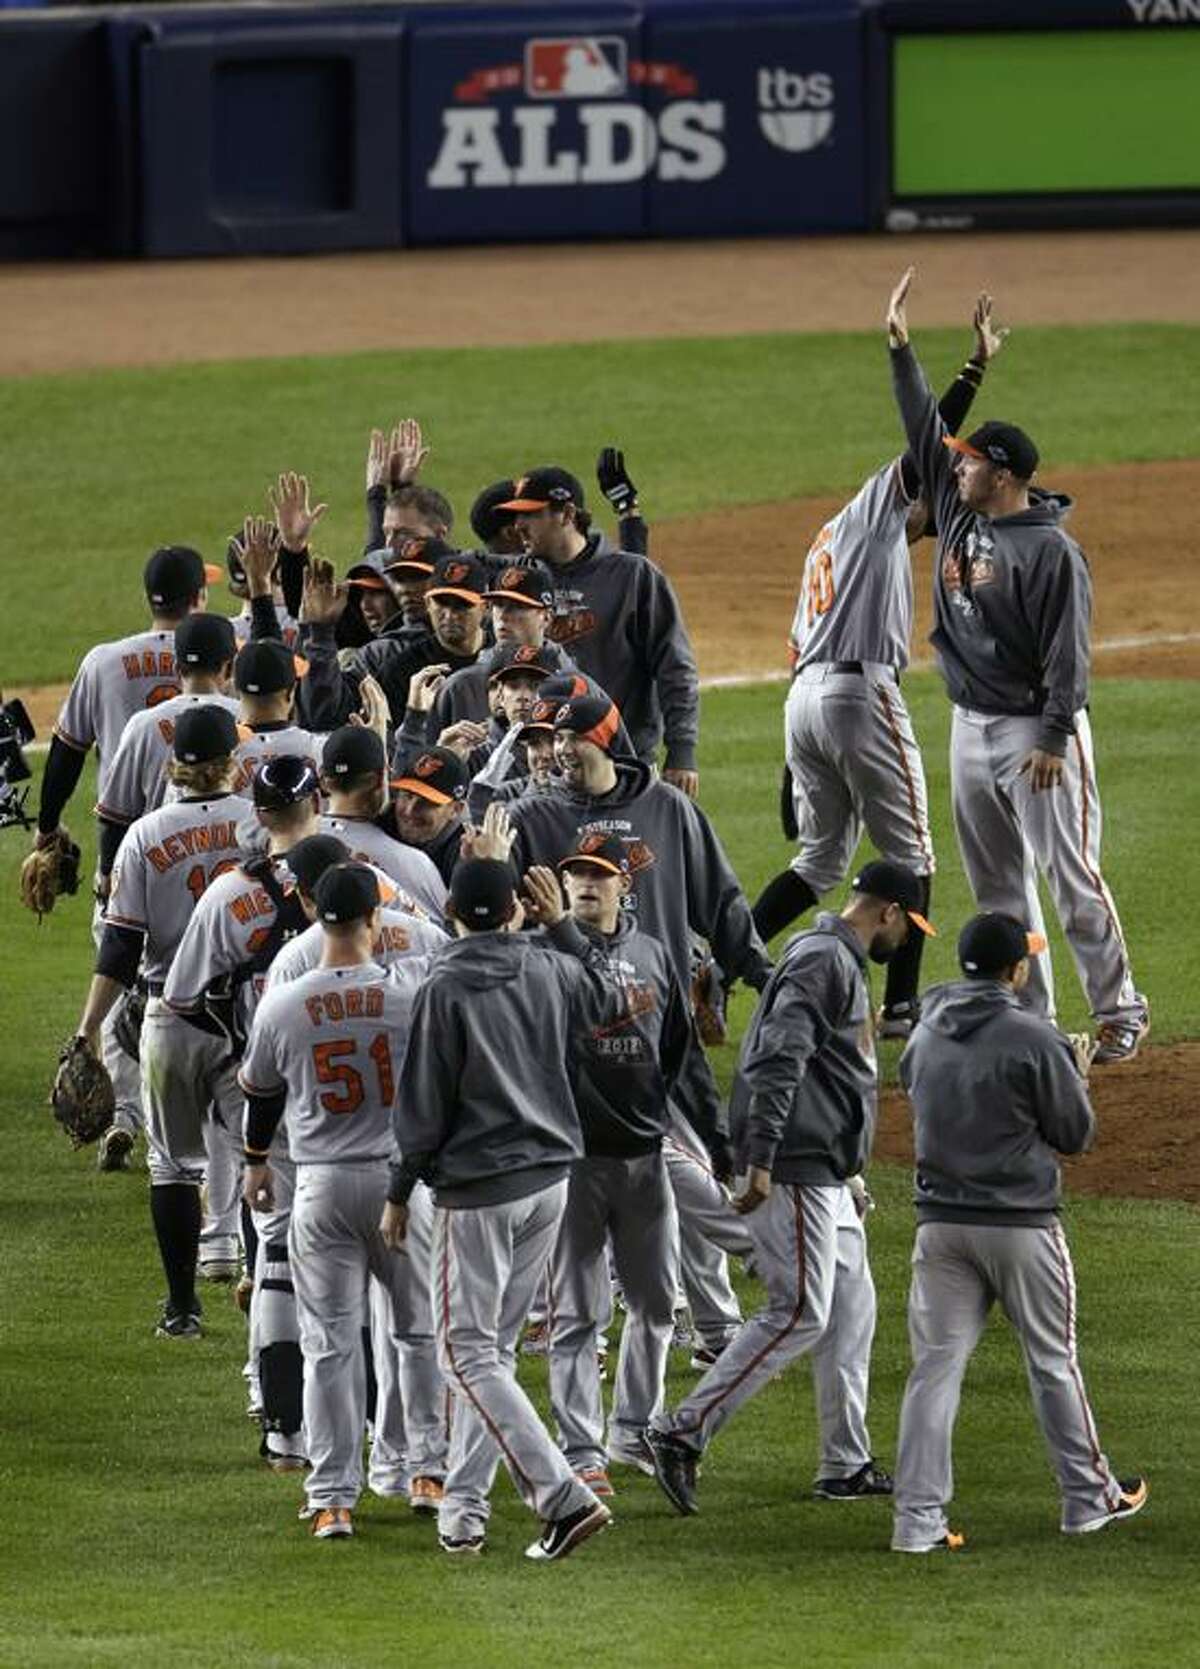 The Baltimore Orioles celebrate after beating the New York Yankees 2-1 in 13 innings in Game 4 of the American League division baseball series Thursday, Oct. 11, 2012, in New York. (AP Photo/Peter Morgan)